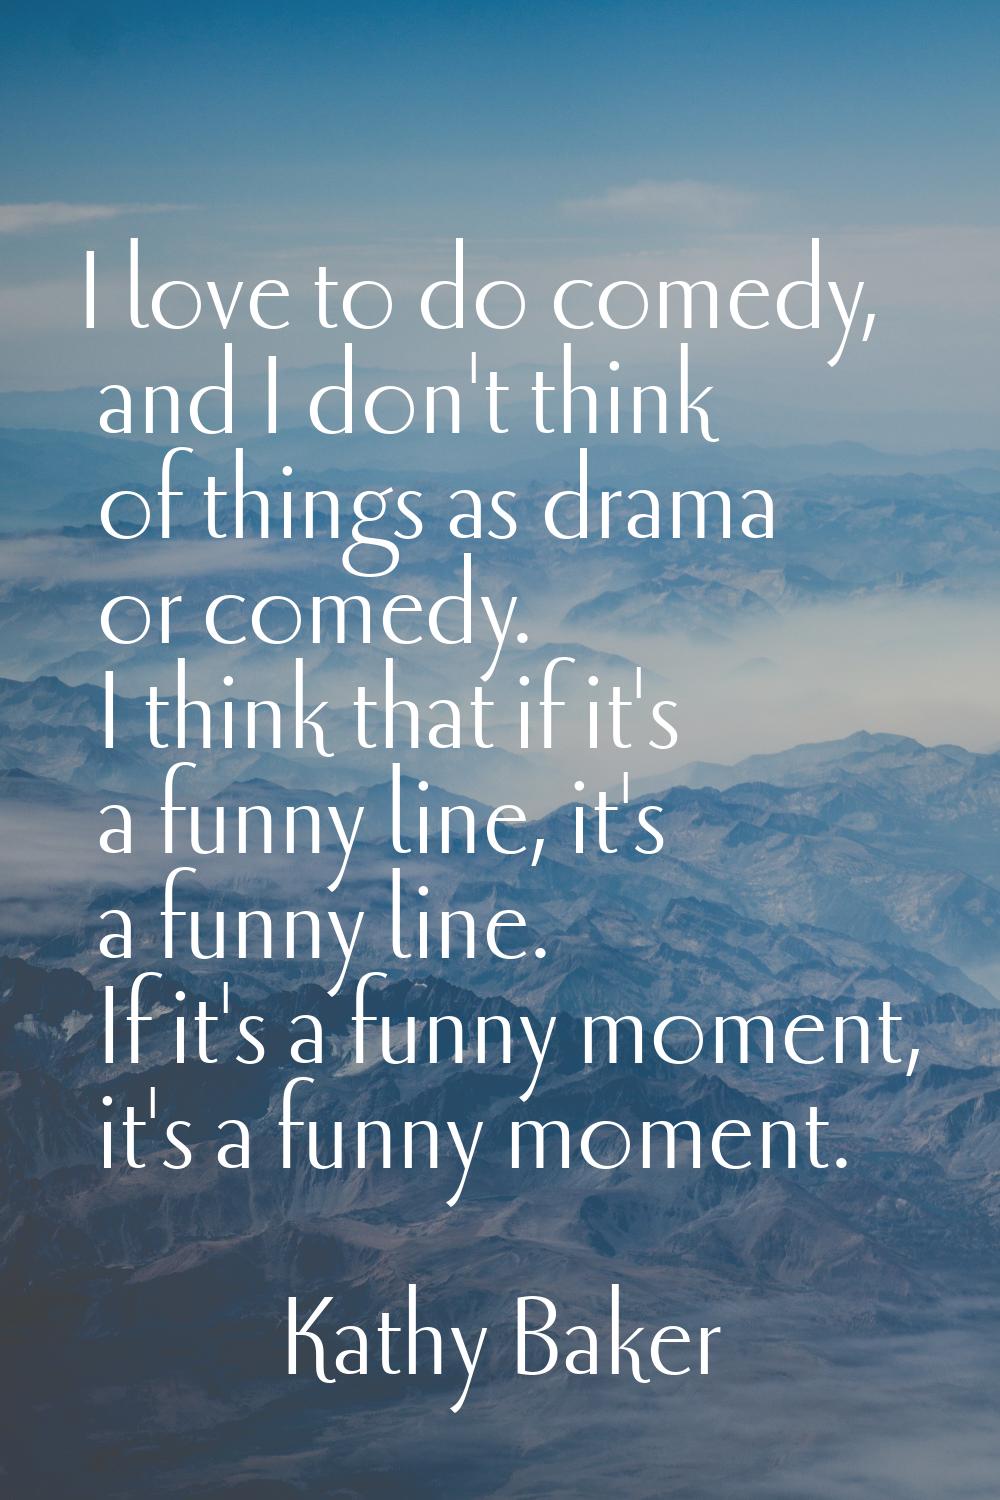 I love to do comedy, and I don't think of things as drama or comedy. I think that if it's a funny l